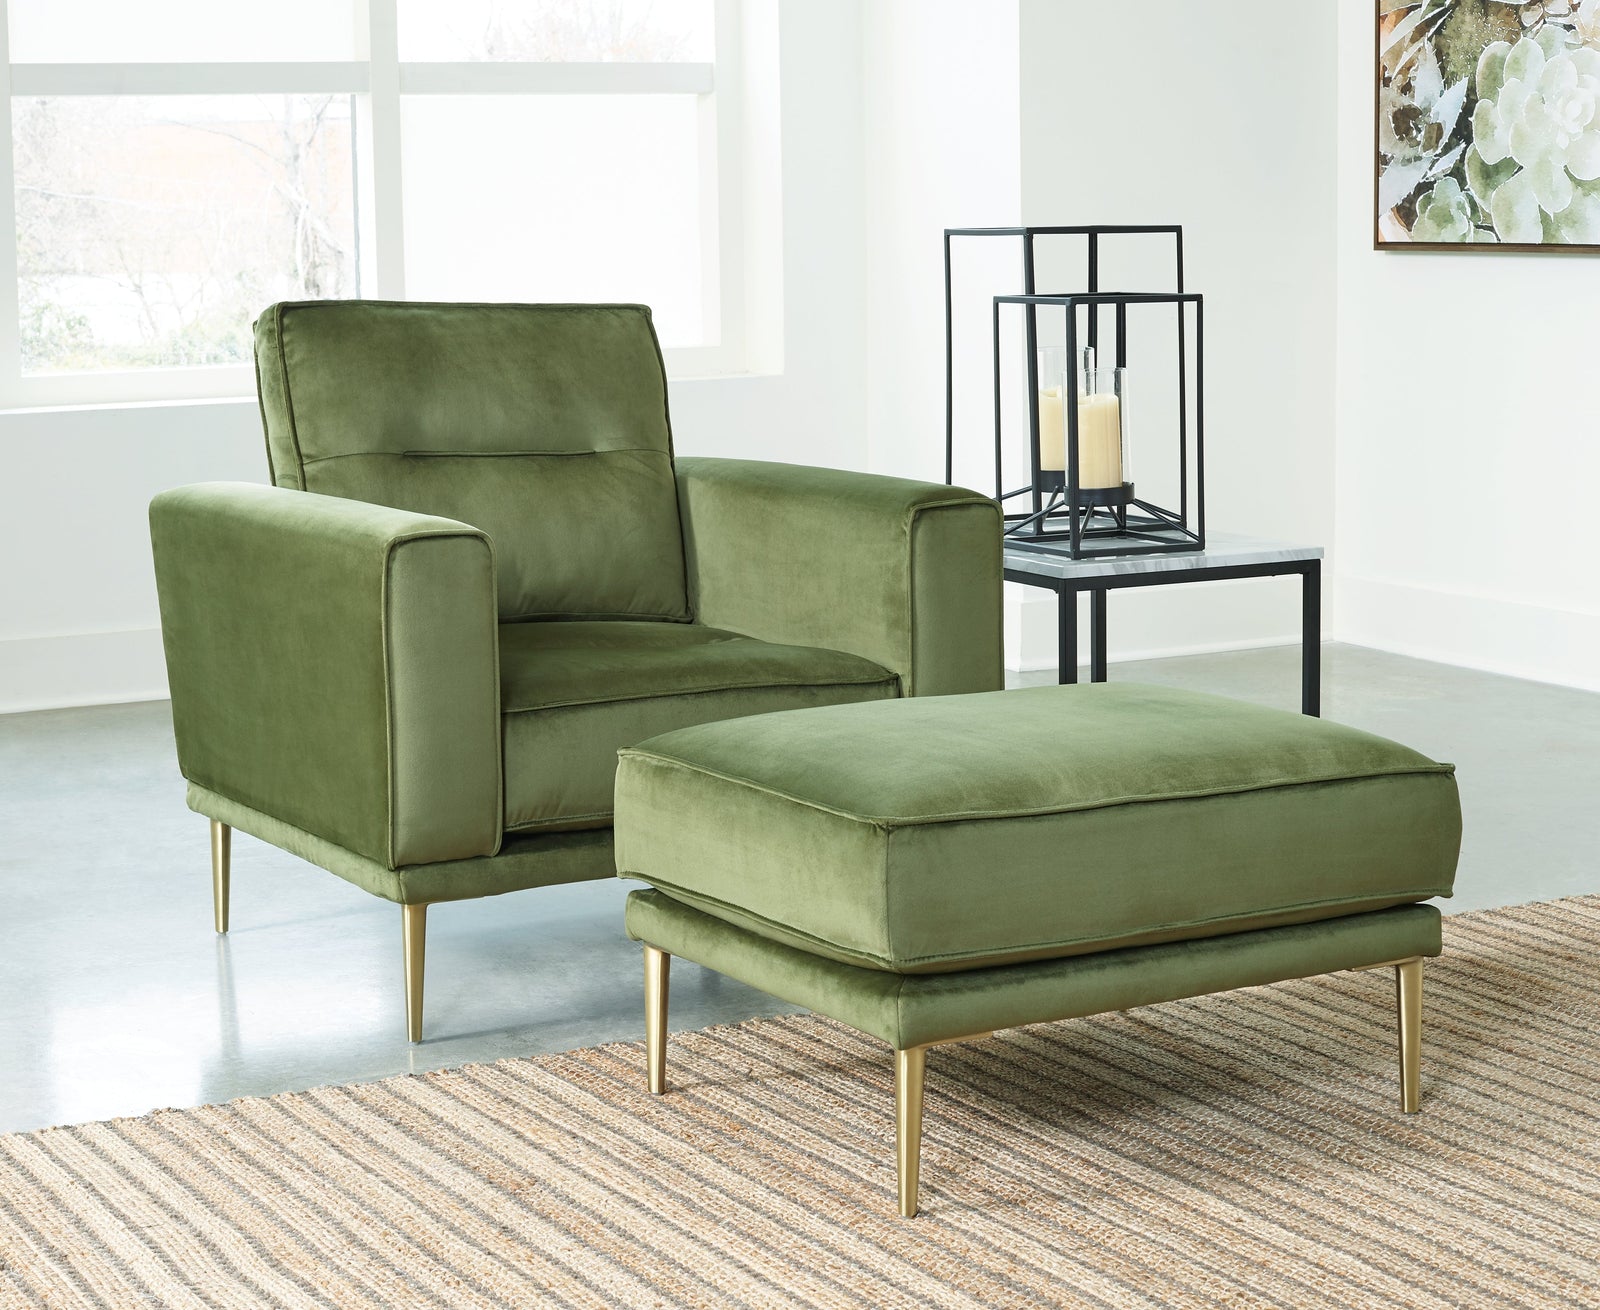 Macleary Moss Chair And Ottoman